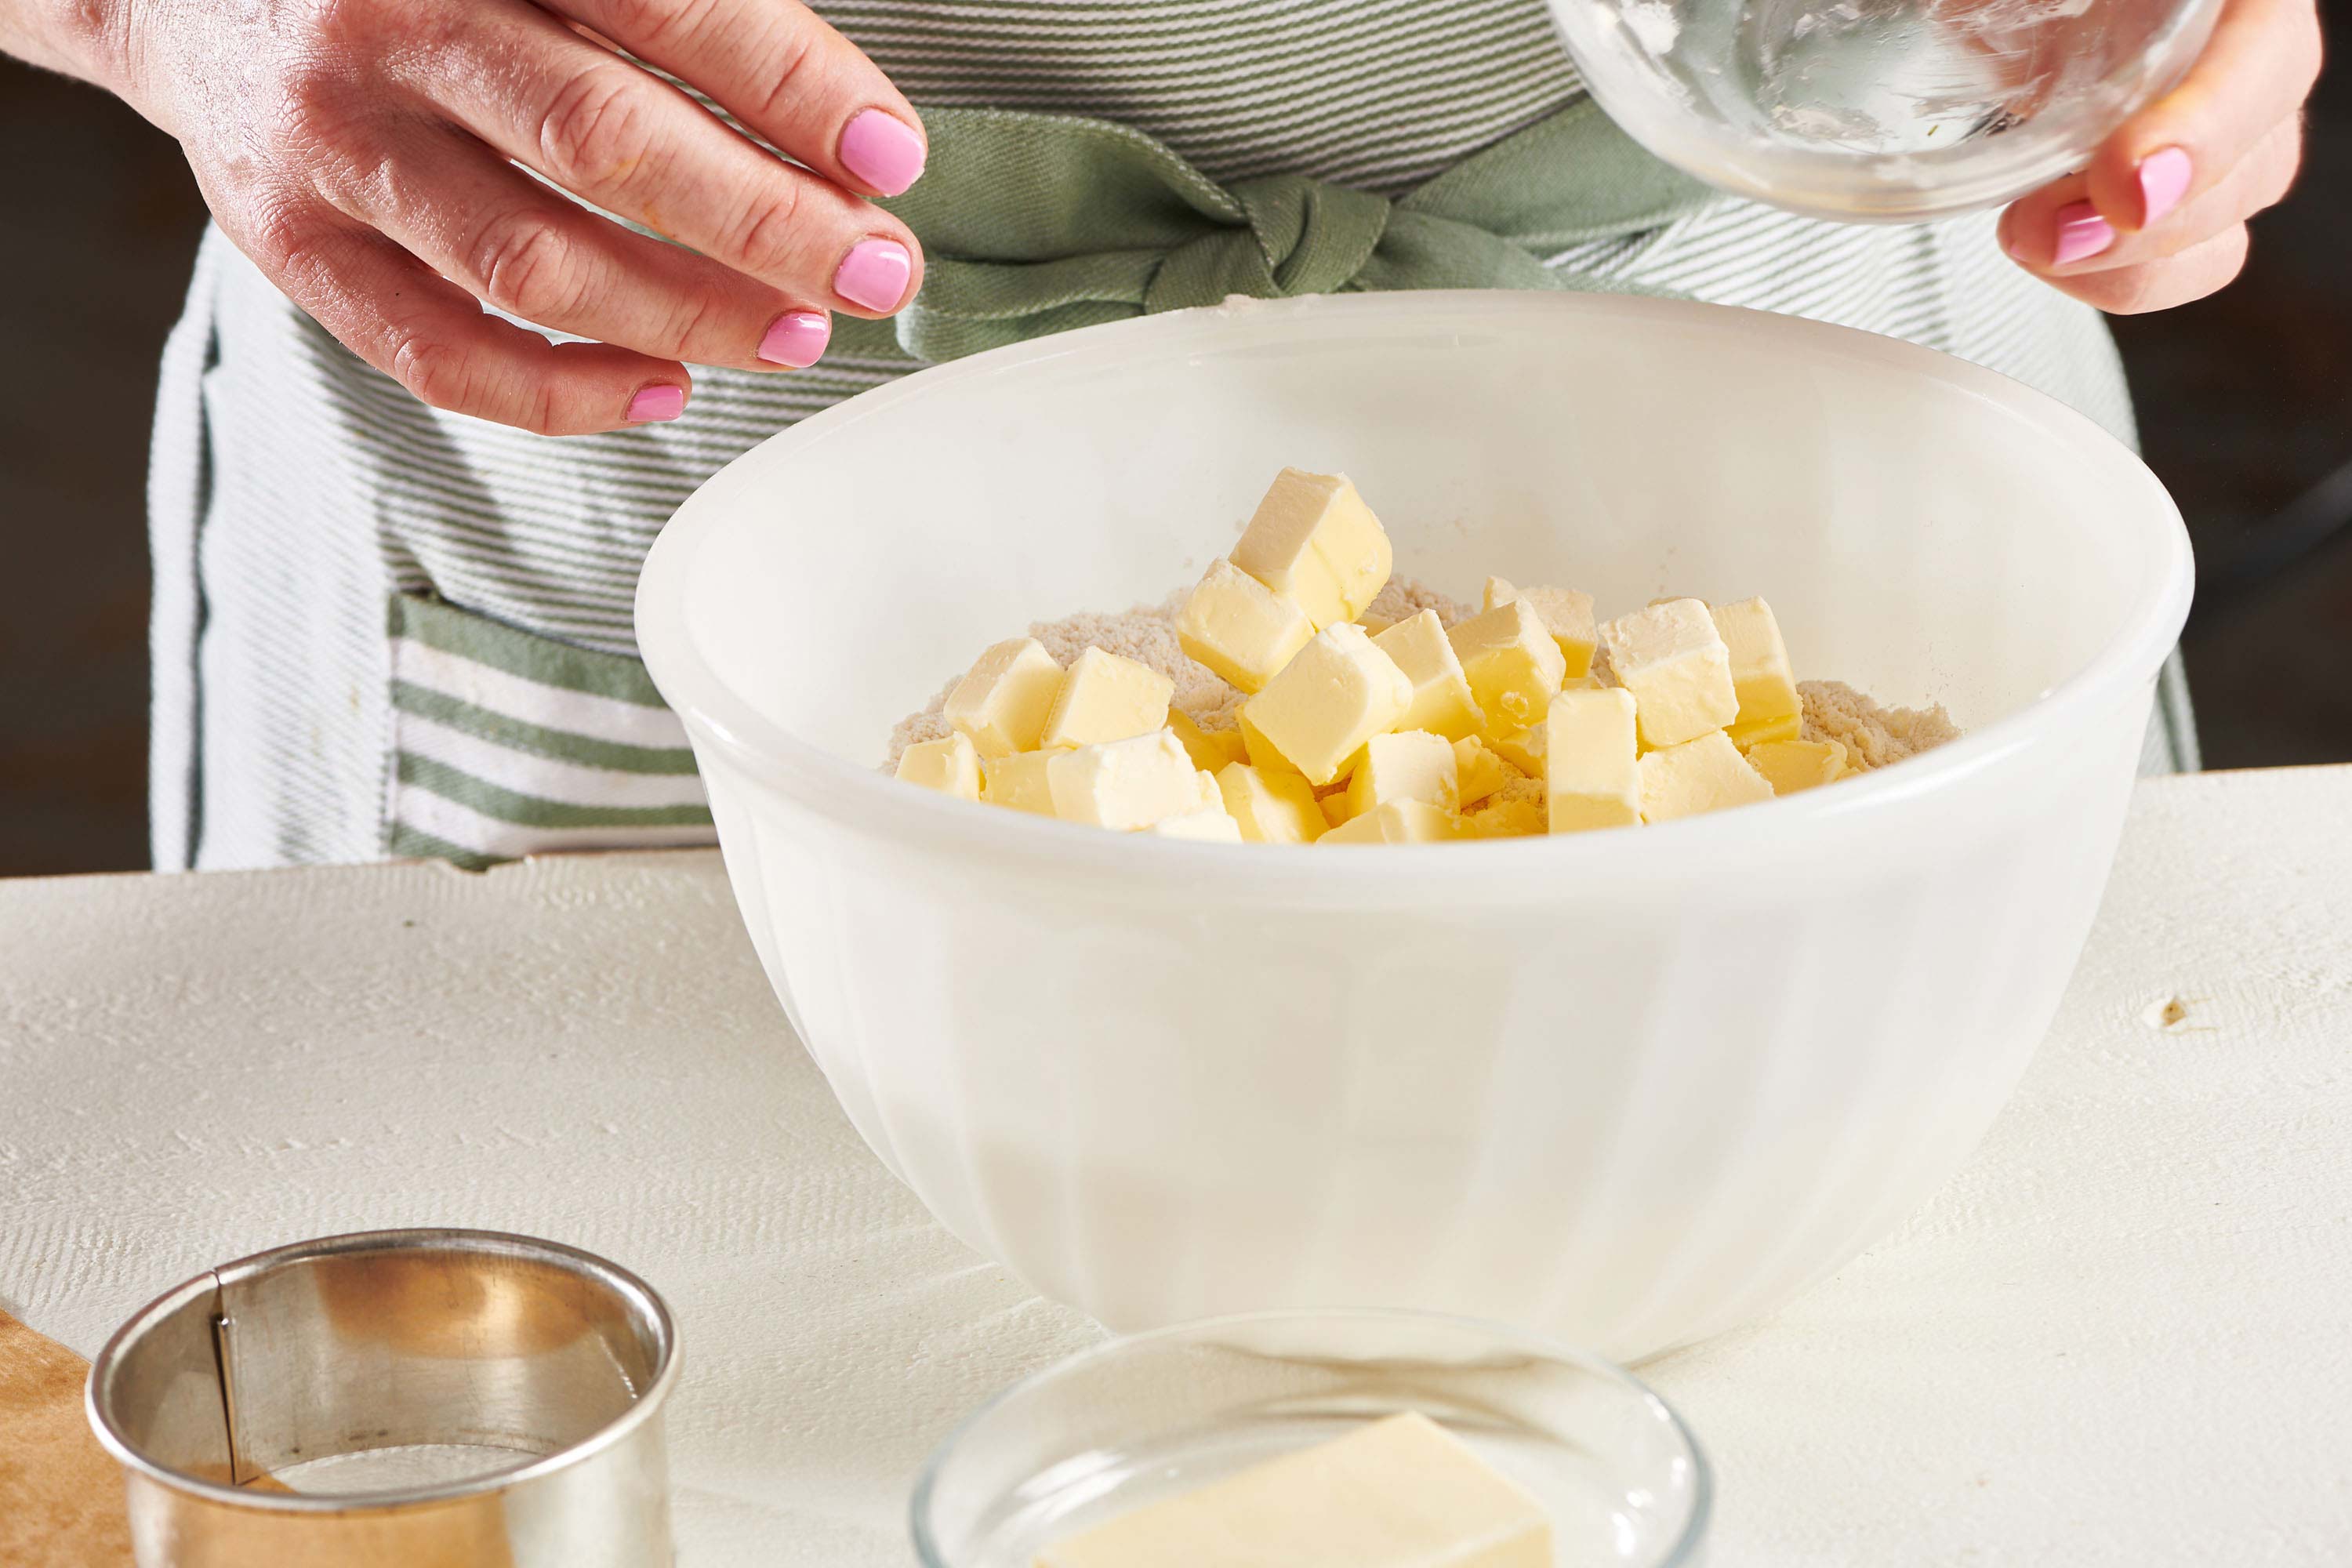 Woman with a bowl of butter and dry ingredients.